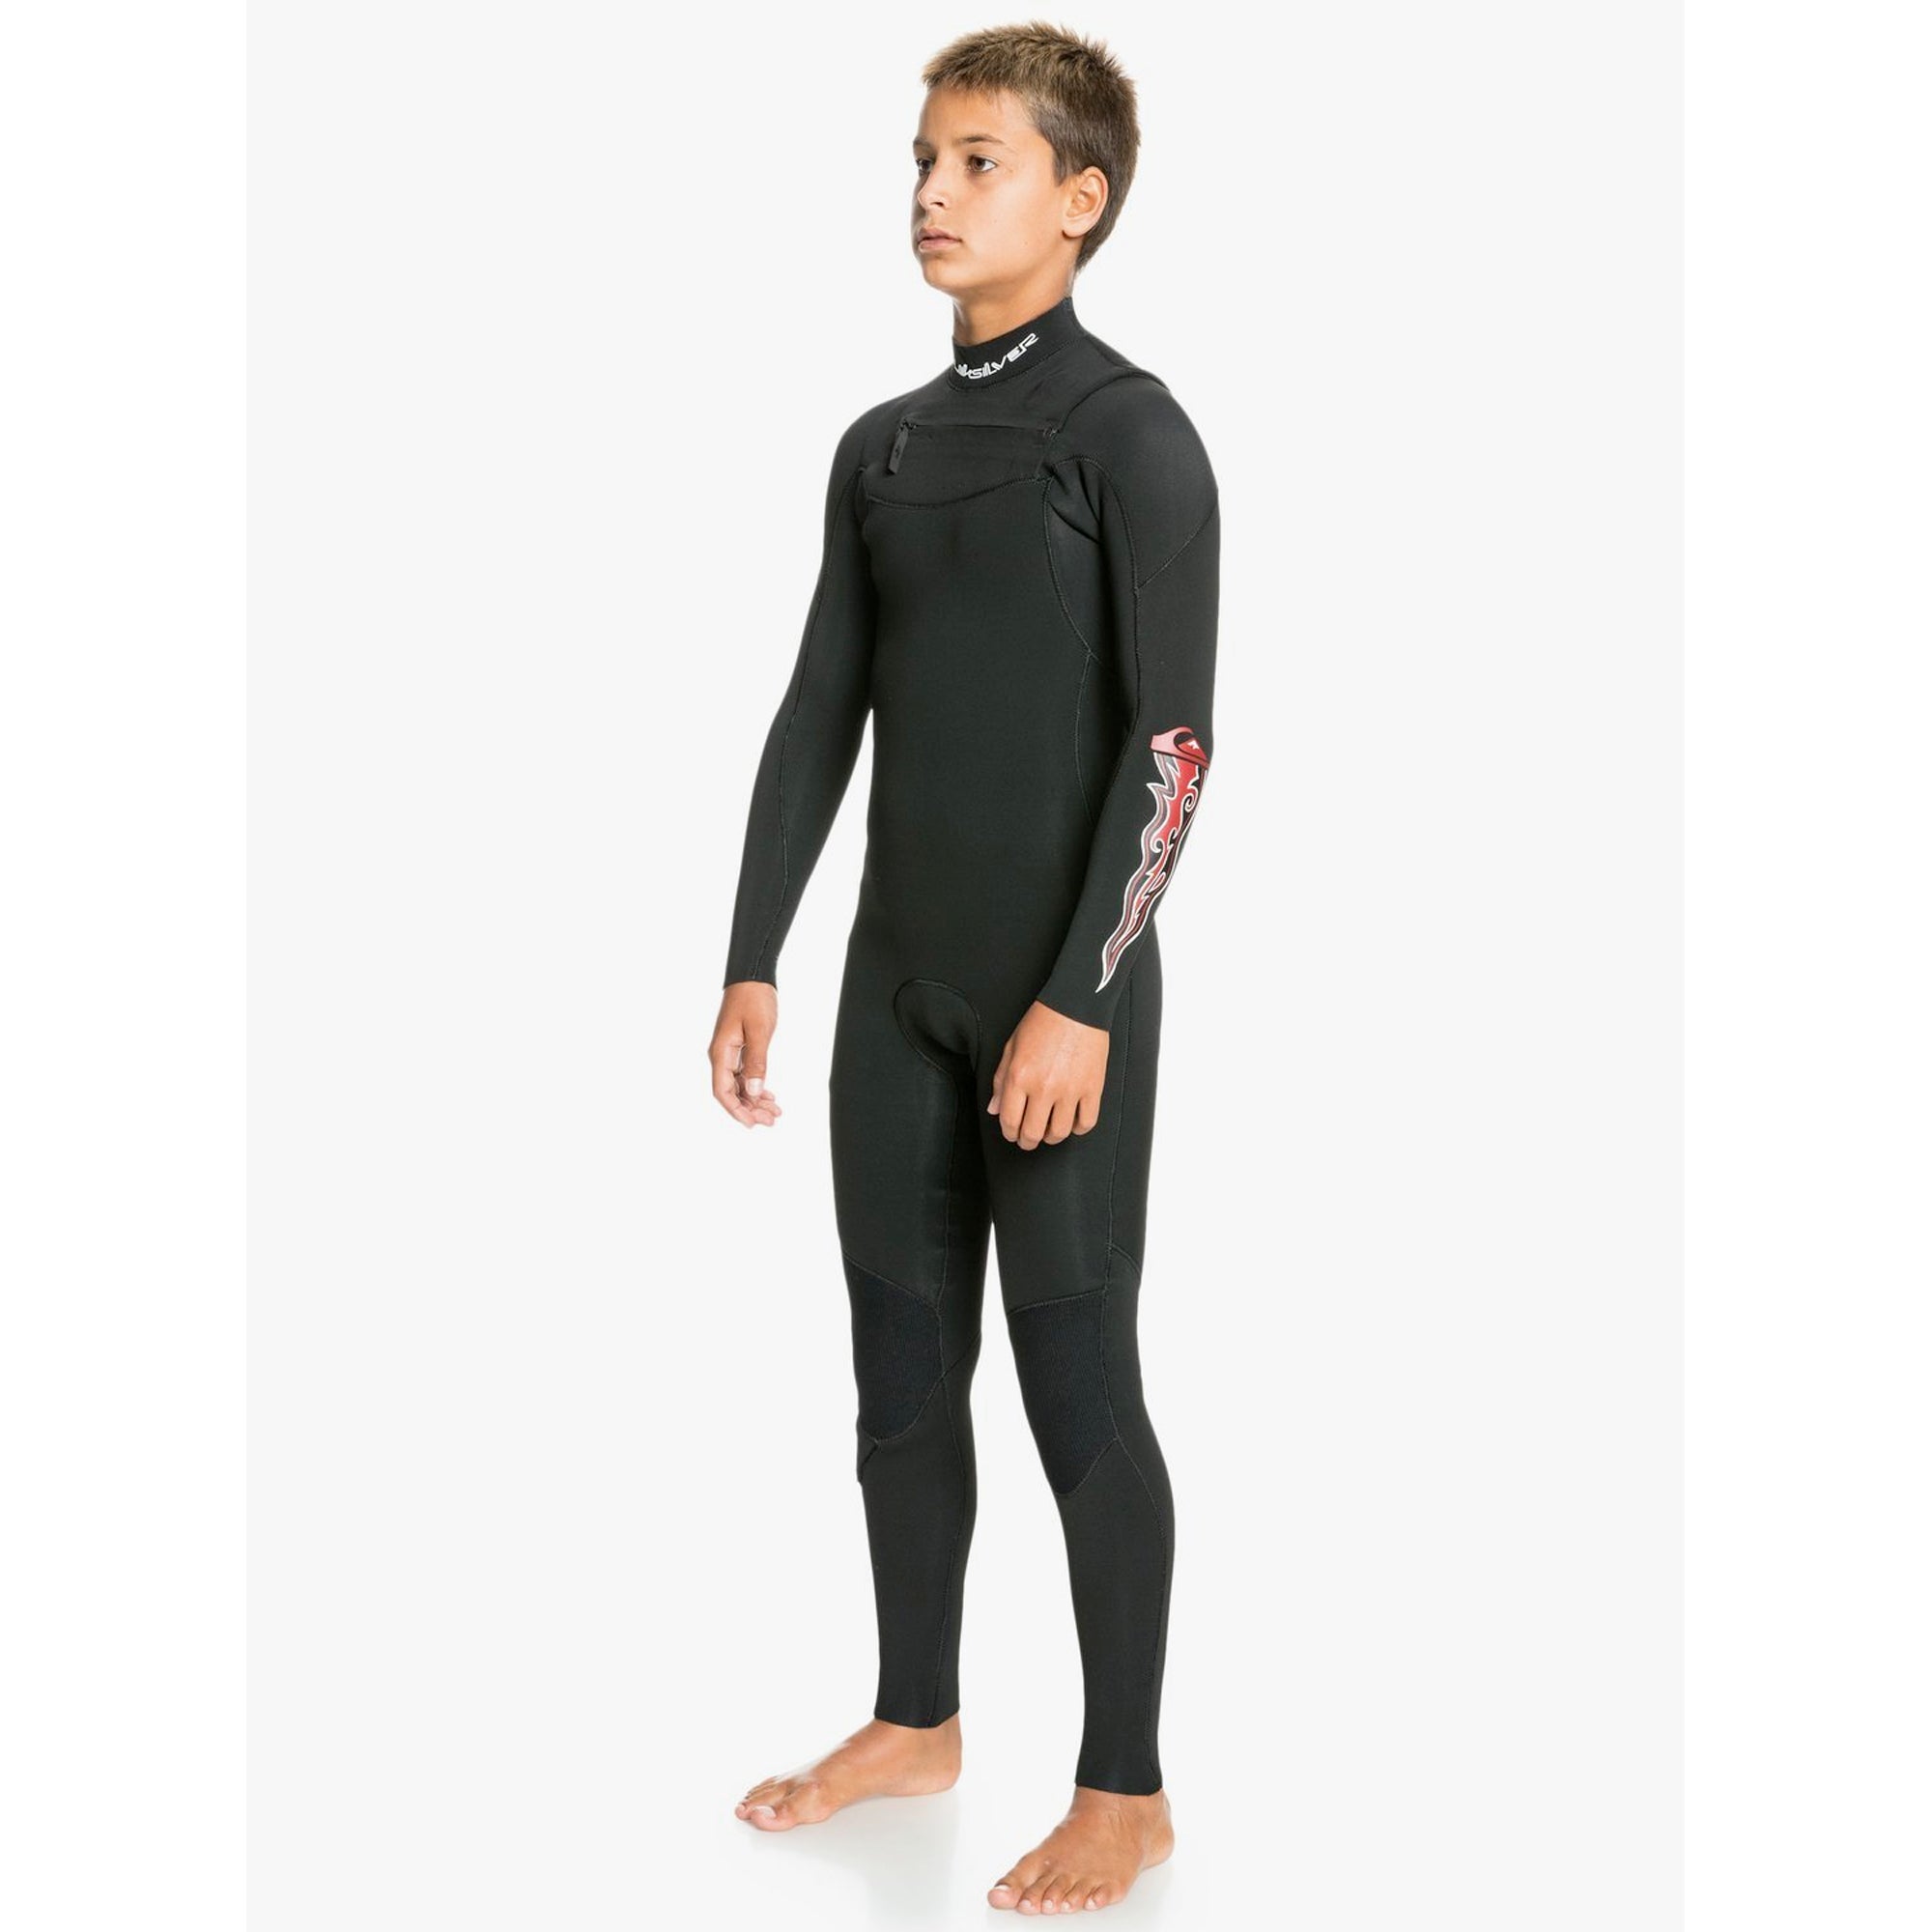 Quiksilver 3/2 Capsule Everyday Sessions Chest-Zip Youth Boy's Fullsuit Wetsuit